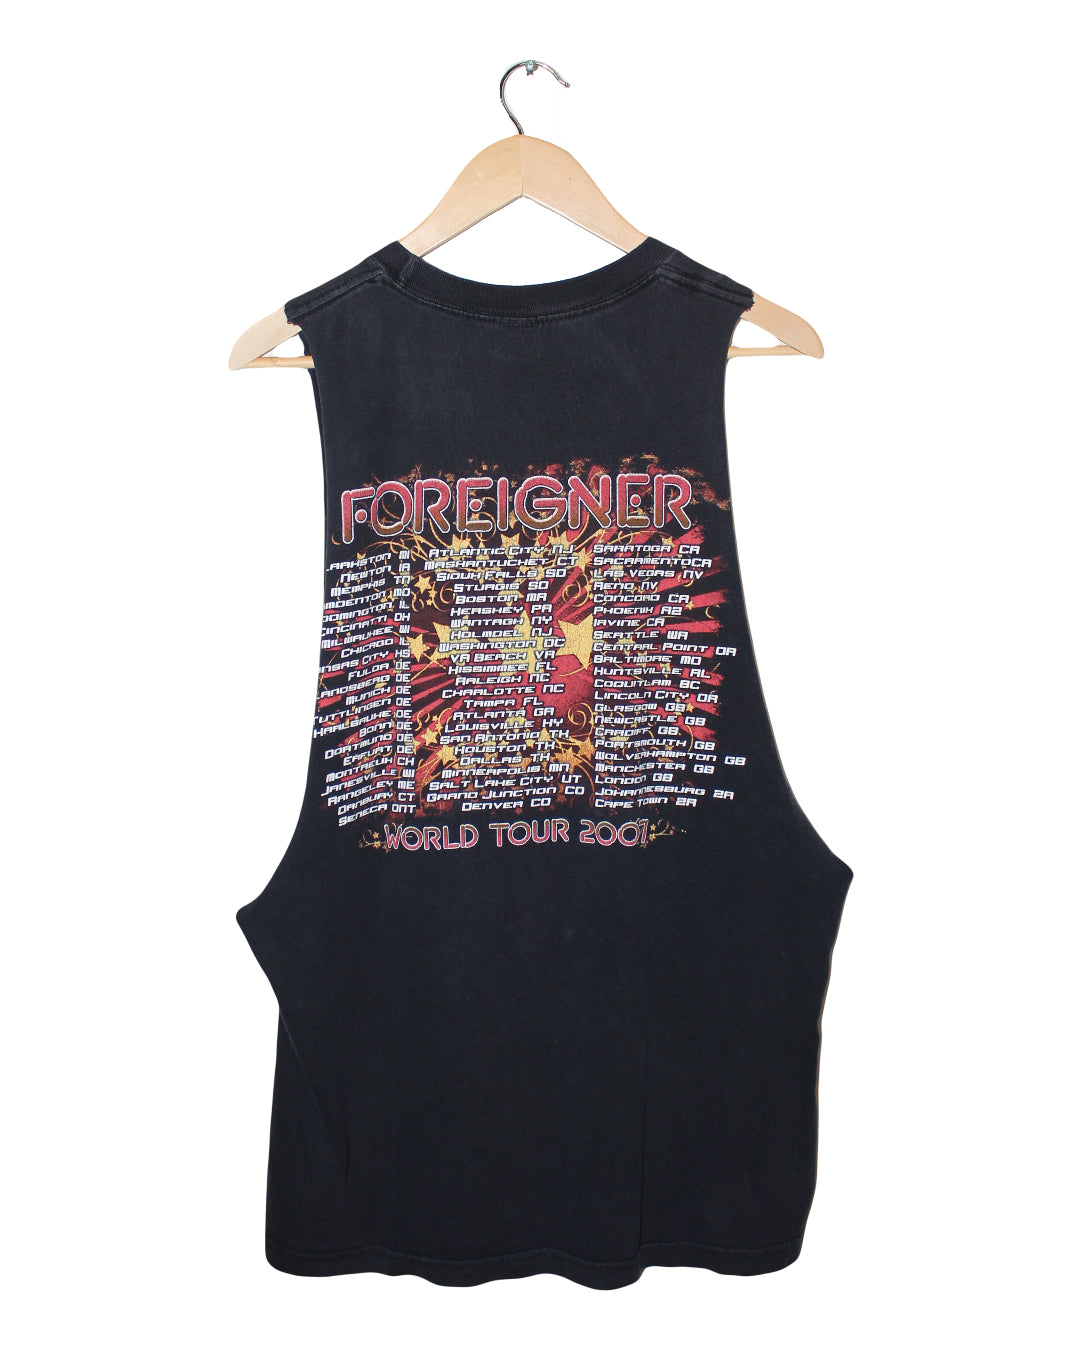 VINTAGE FOREIGNER MUSCLE TANK